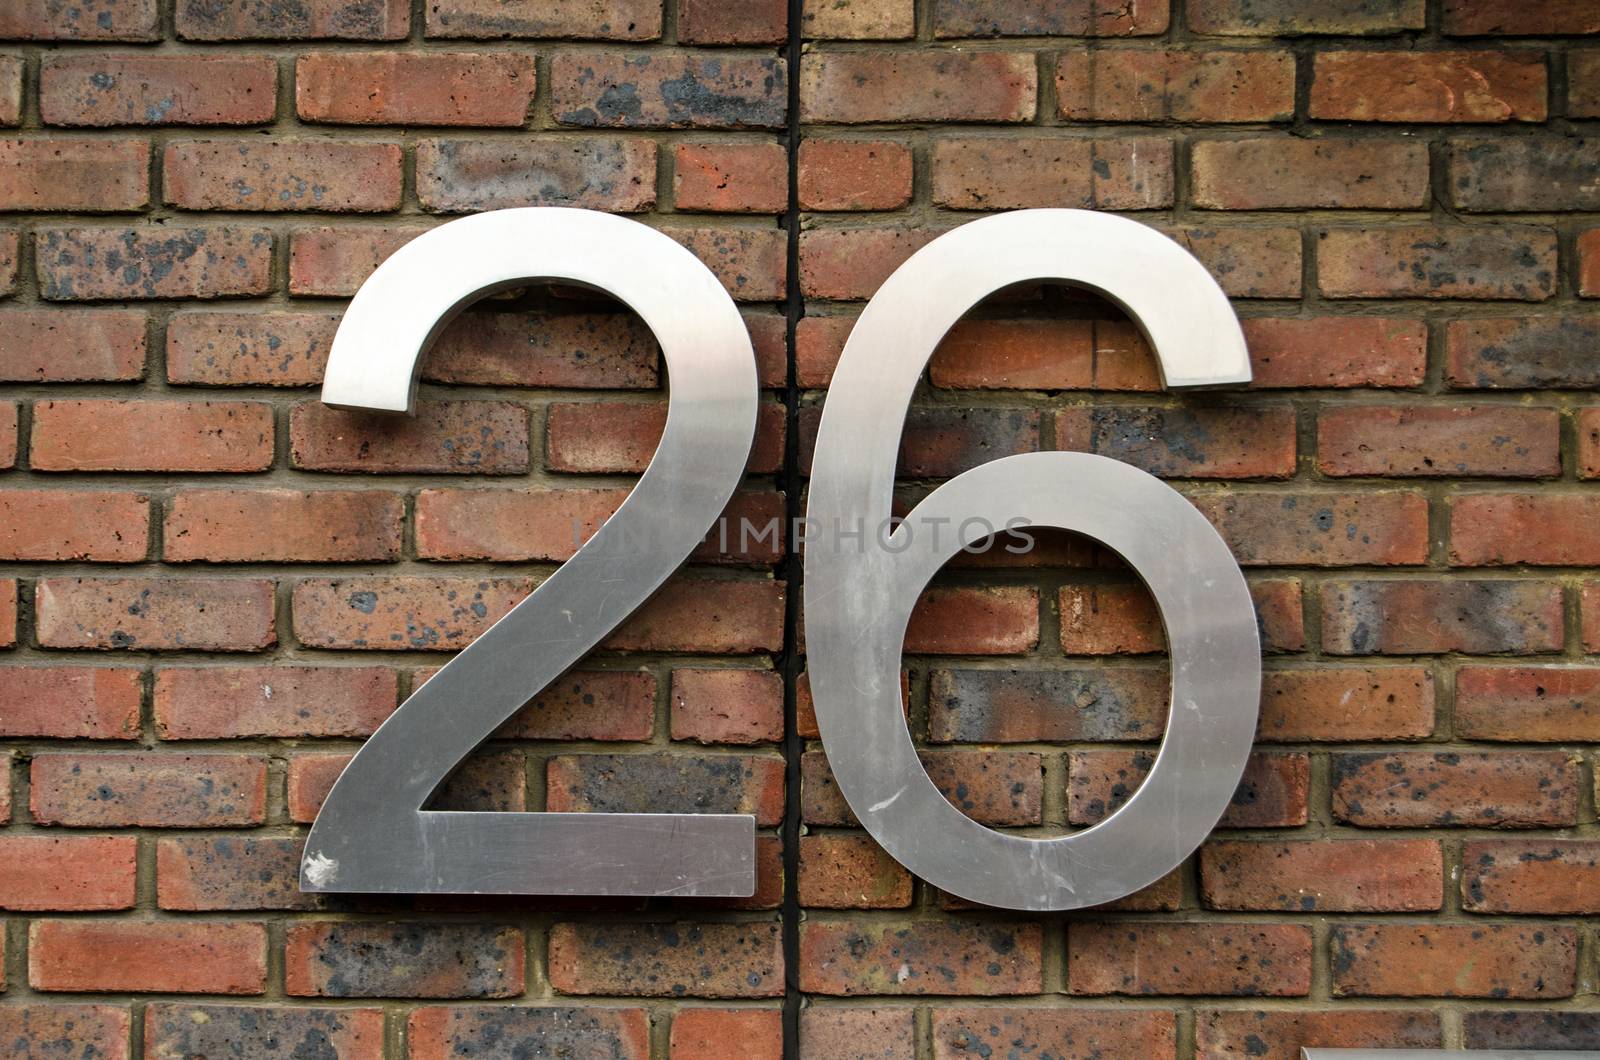 Figures for the number twenty six attached to the outside wall of an office block.